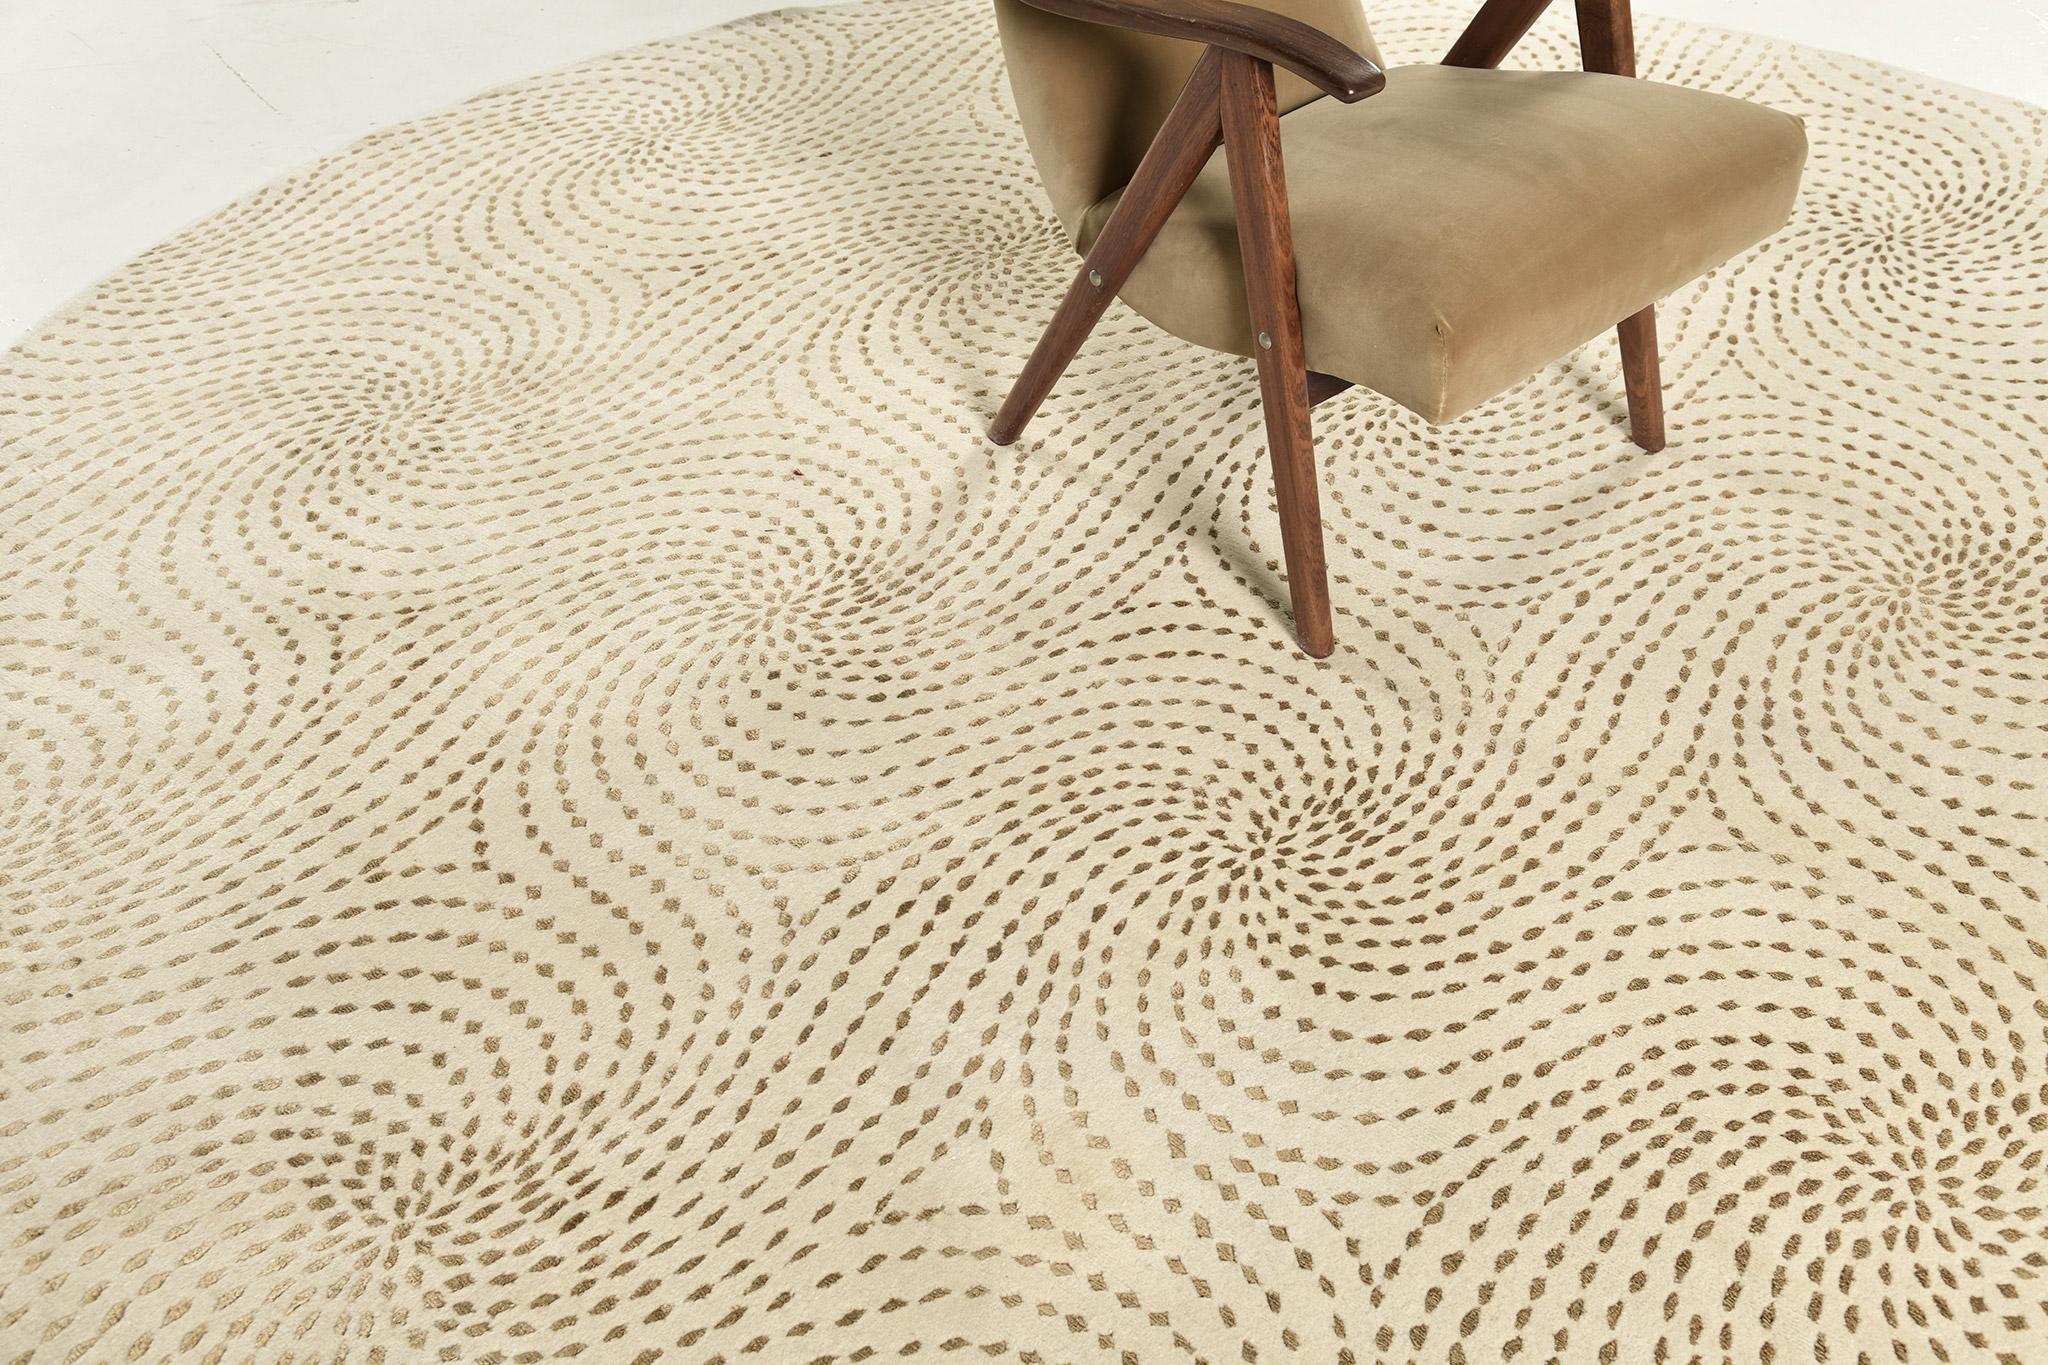 More for a contemporary theme, this stunning Nepalese rug encompasses an elegant pattern of dotted swirls forming the round rug. A home decor that puts on your space a well-known kind of ambiance. A timeless design that will never go out of